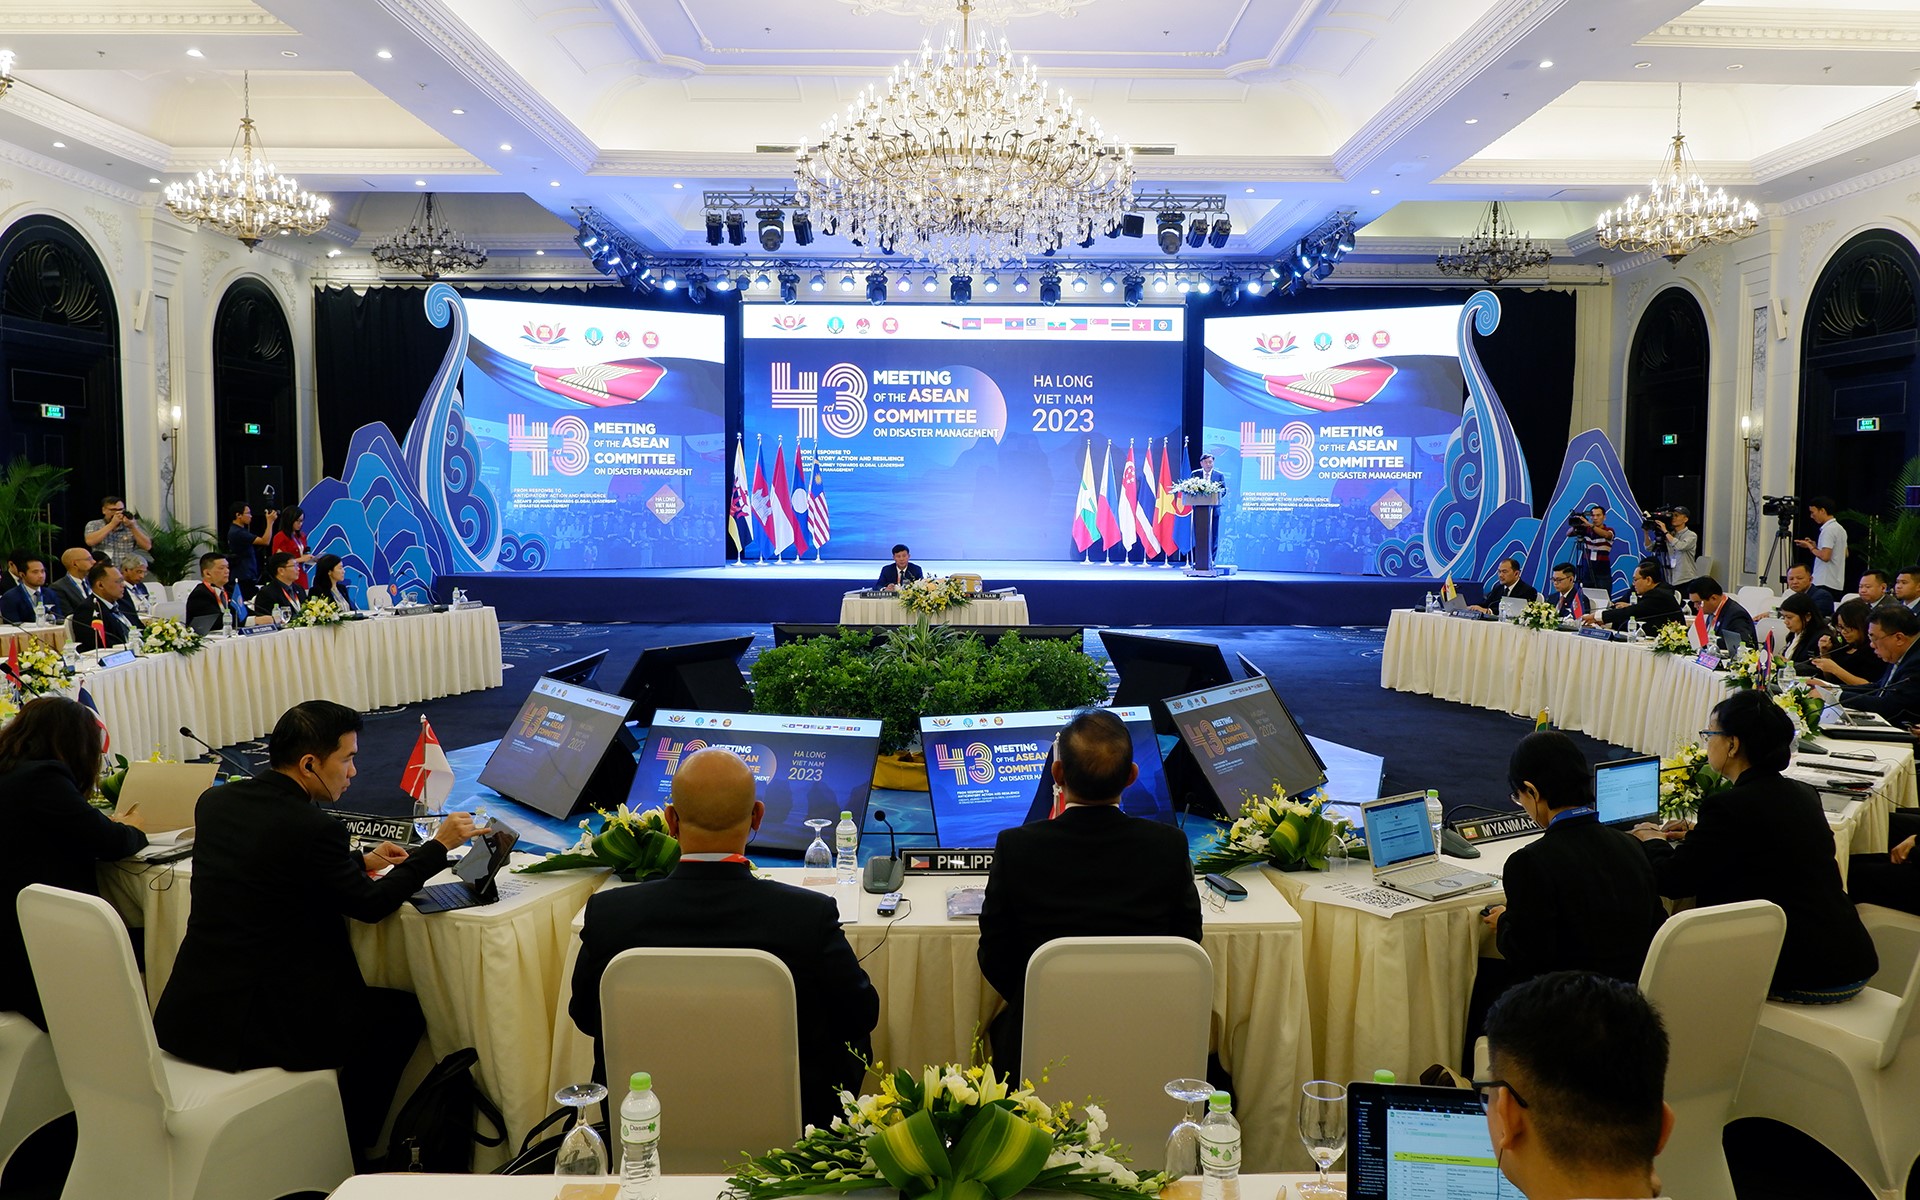 Discussion panorama at the 43rd Annual Meeting of ACDM in Quang Ninh. Photo: Bao Thang.